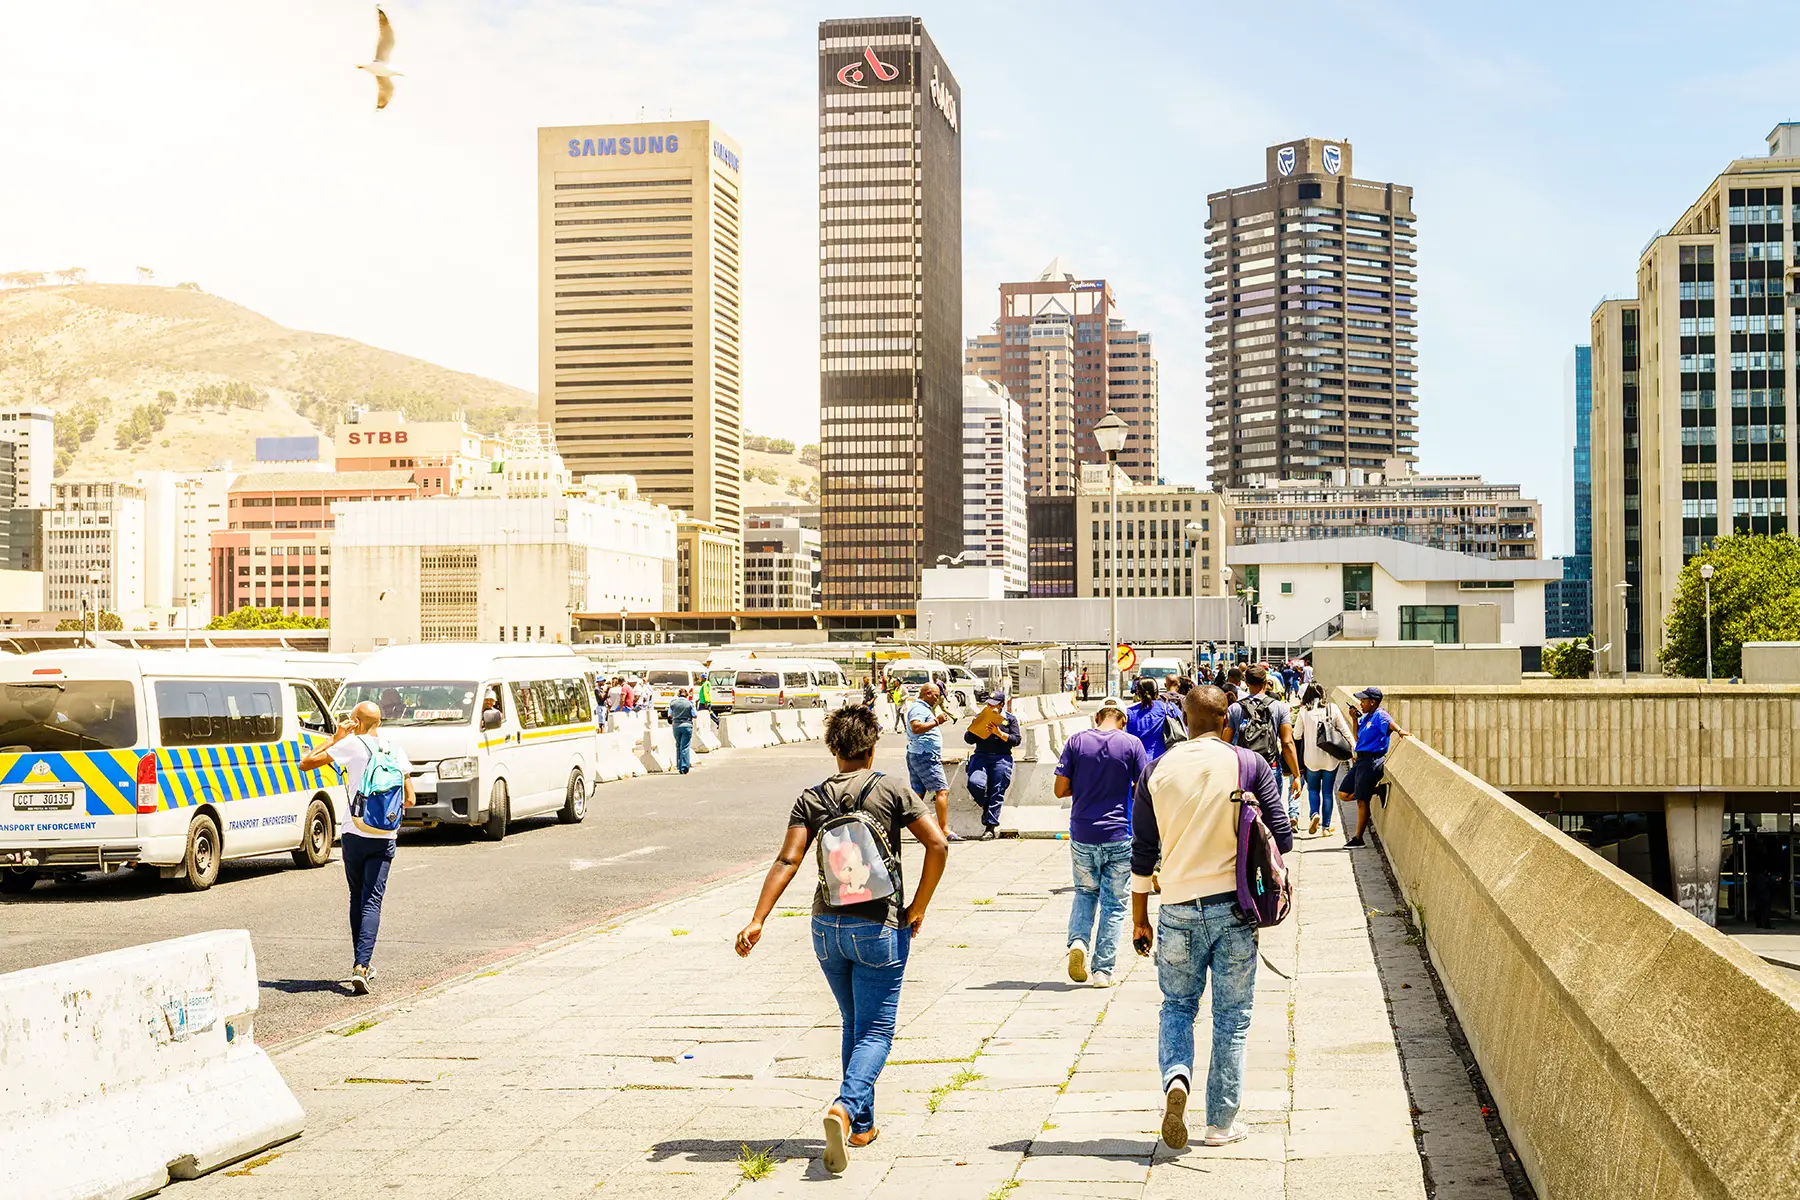 Commuters in Cape Town